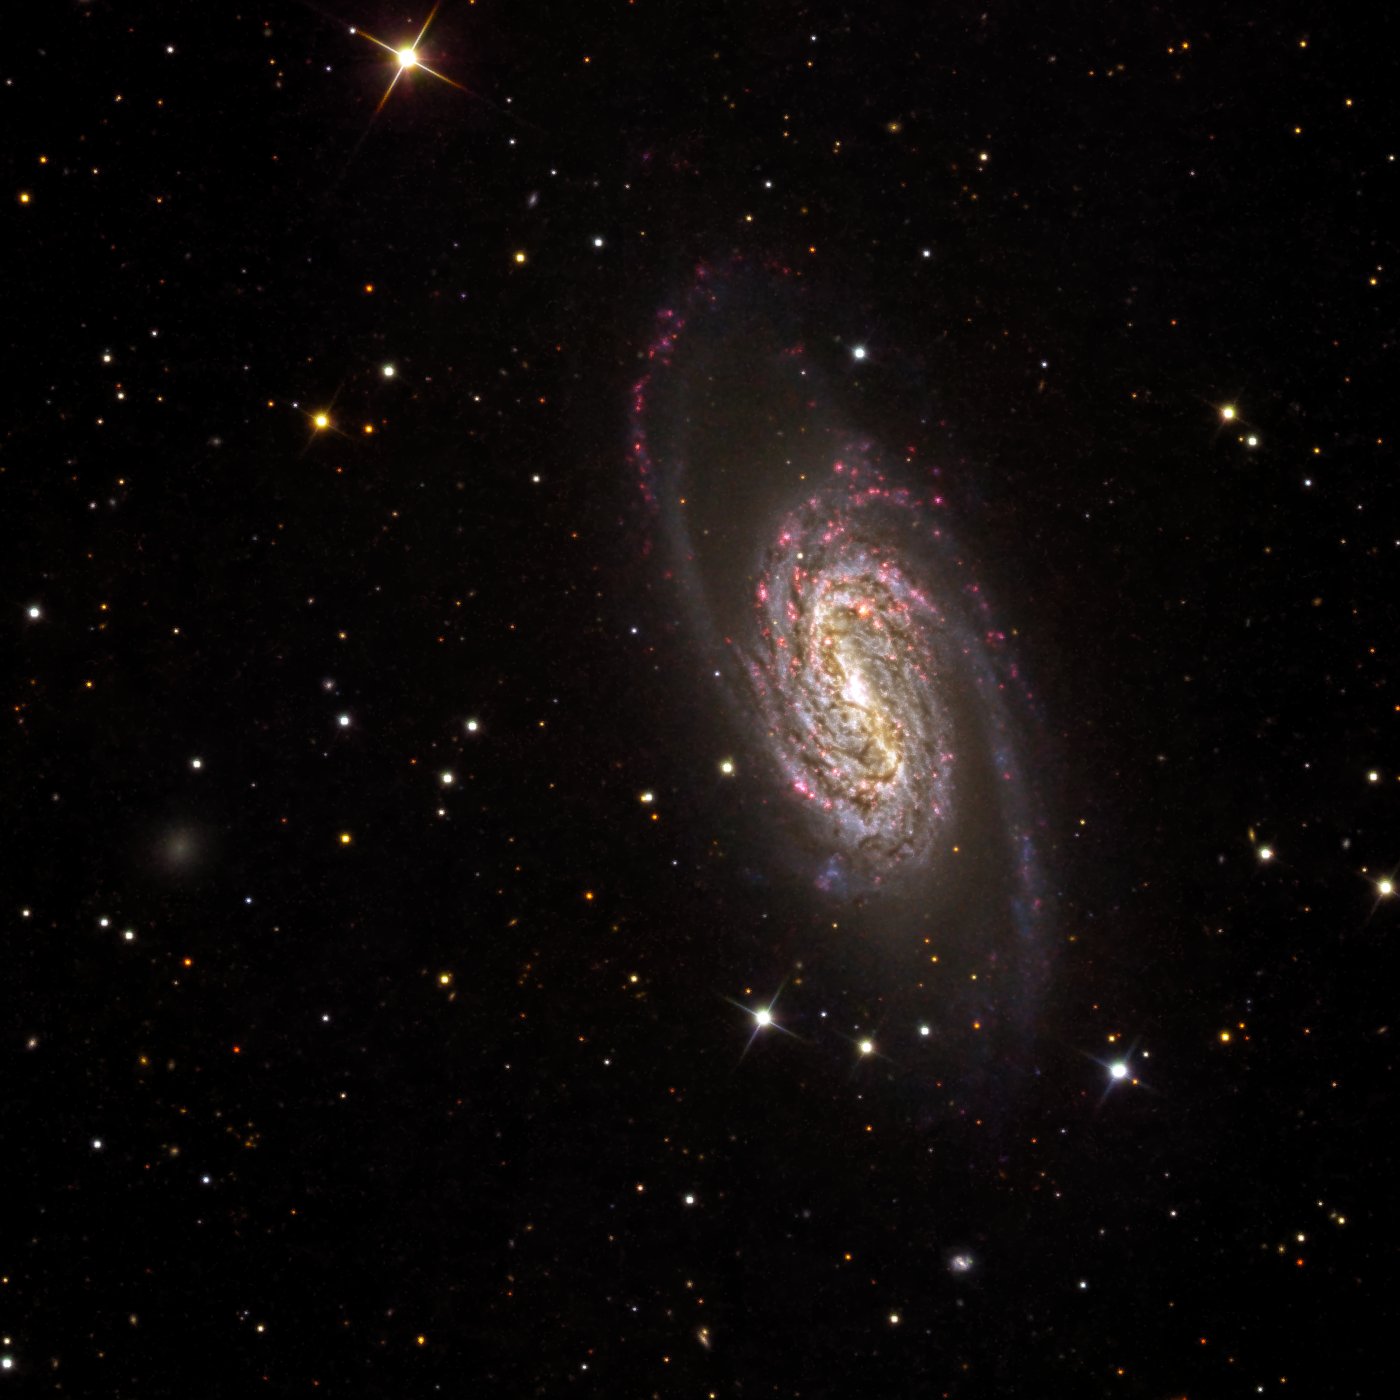 NGC 2903 in H-alpha and continuum light